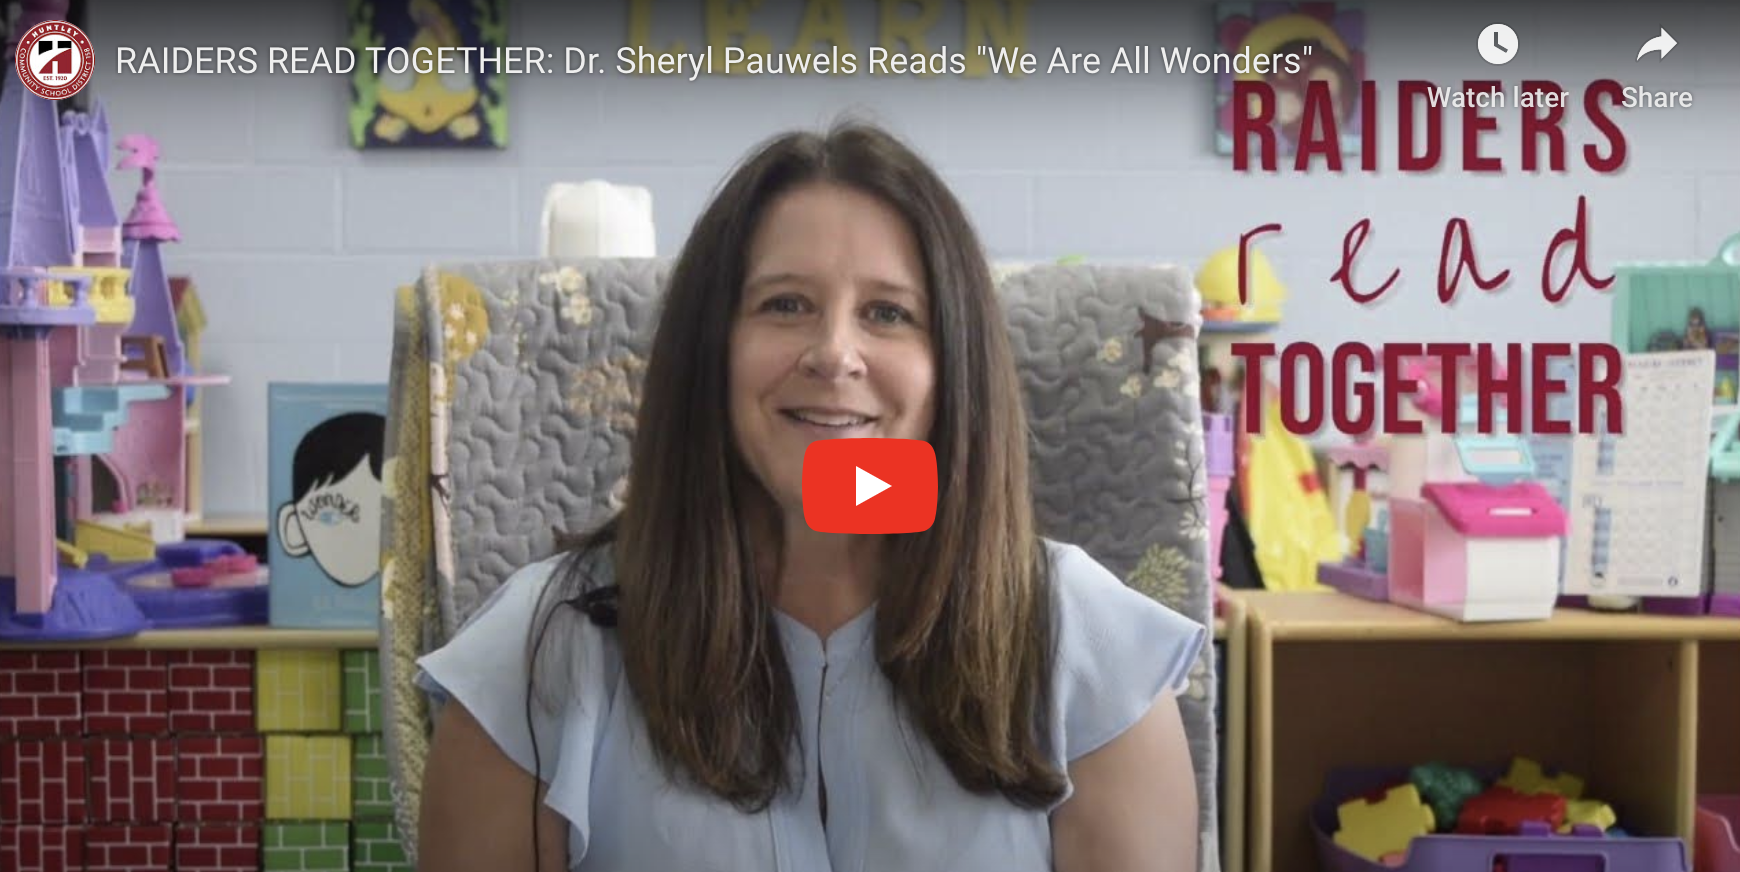 Dr. Sheryl Pauwels reads "We Are All Wonders"